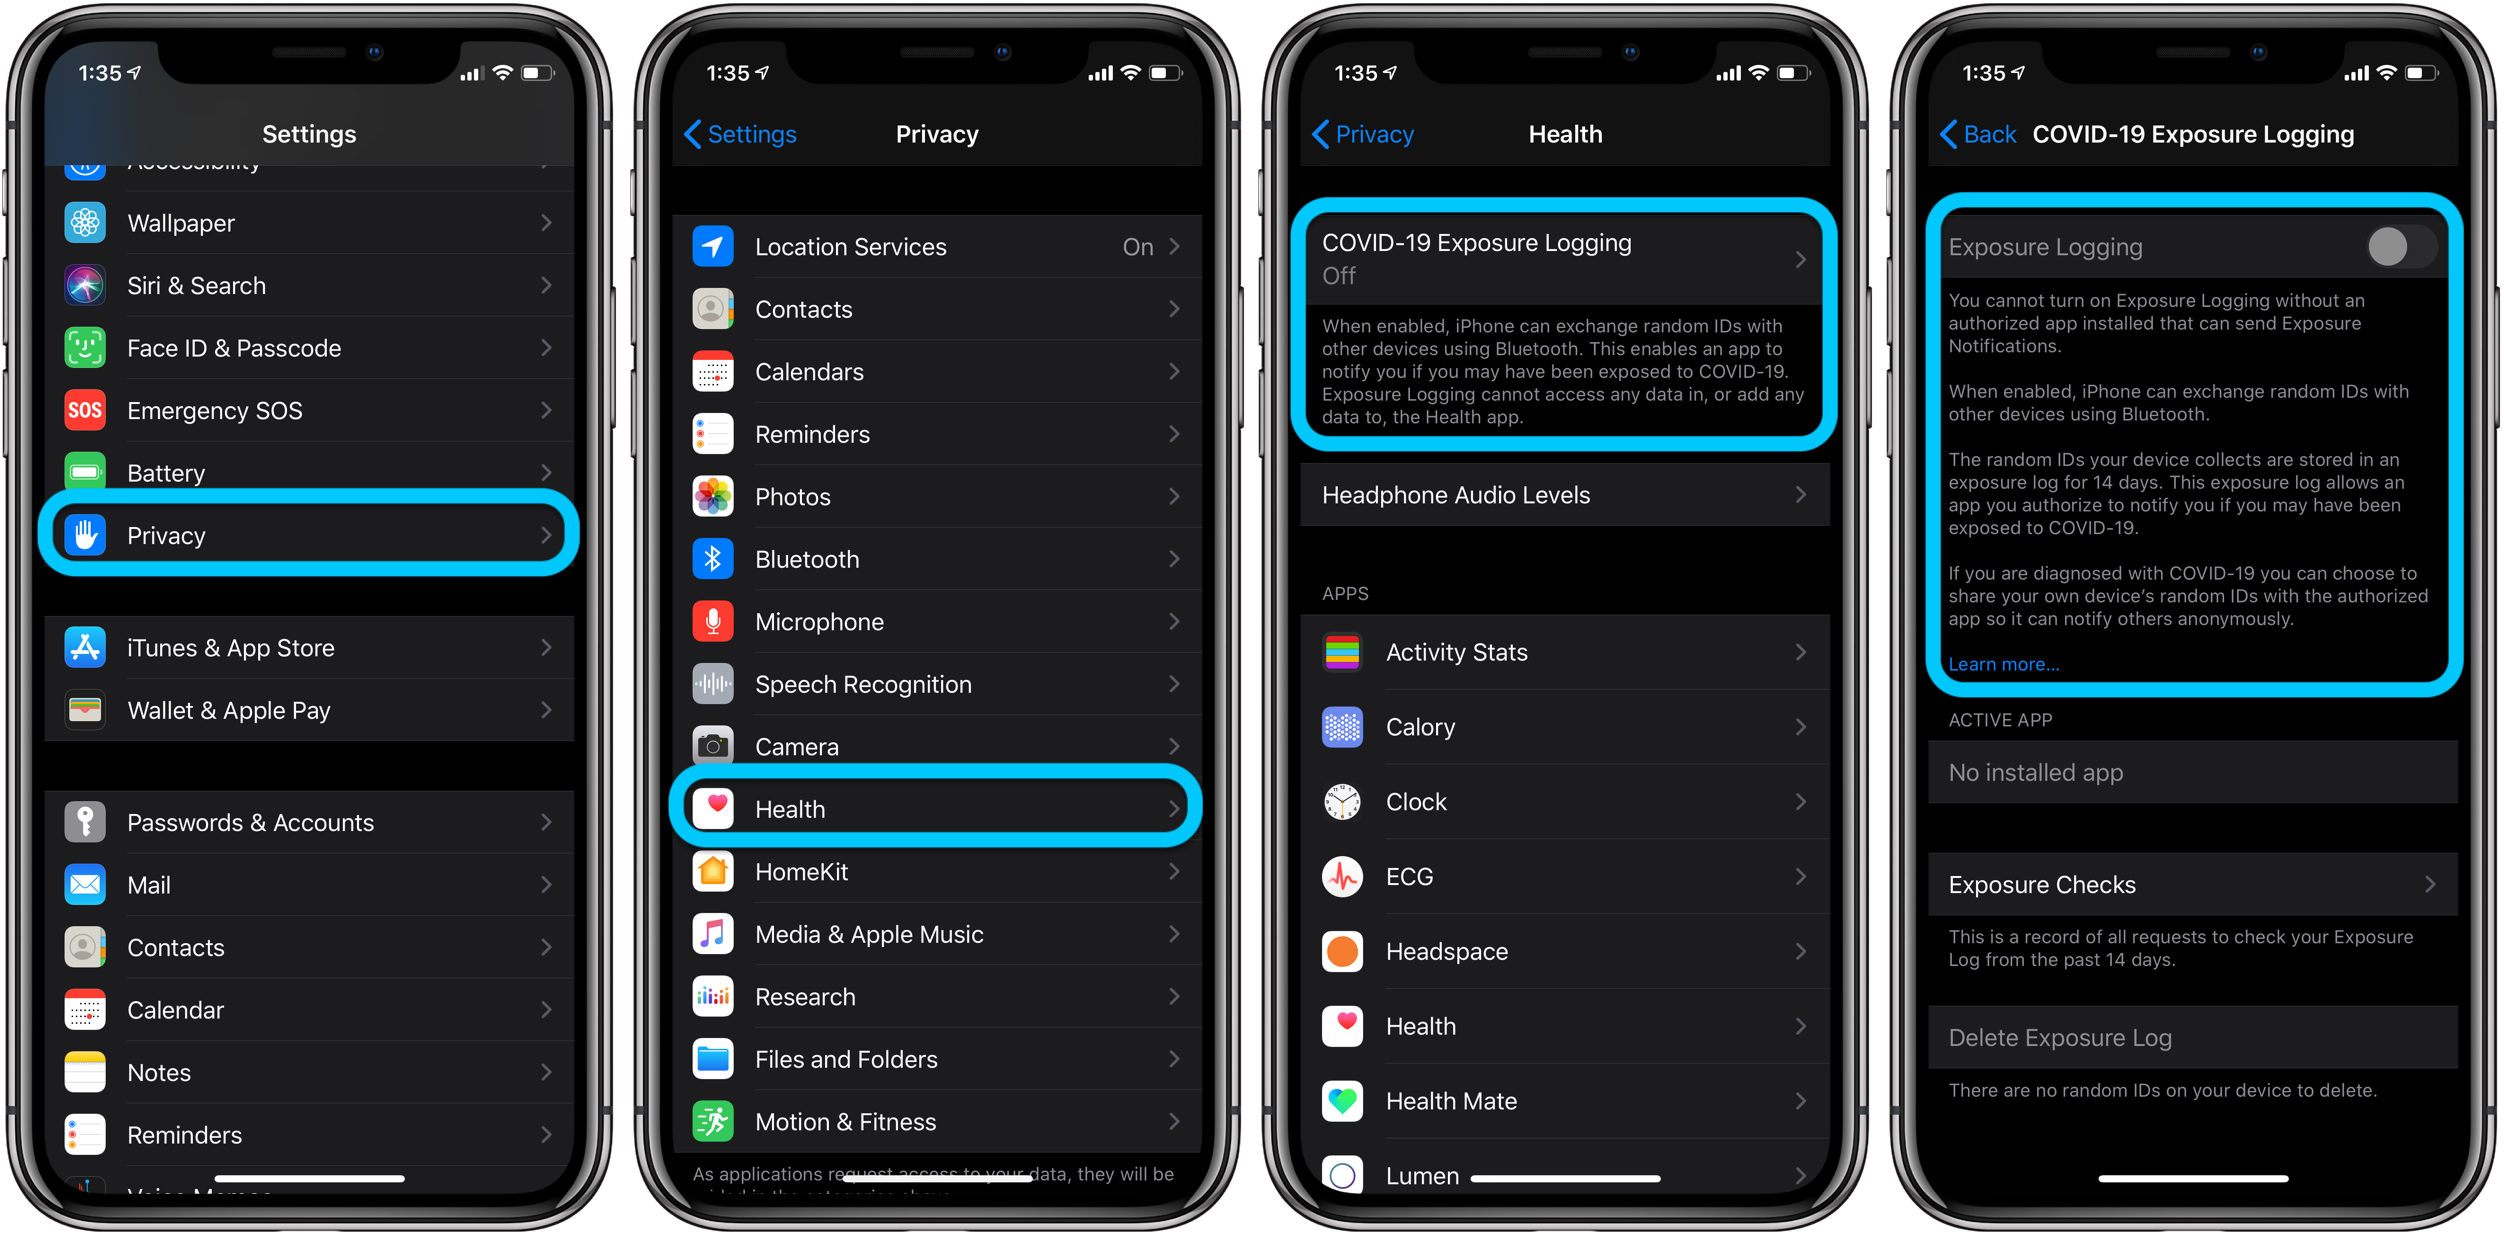 <span href="https://9to5mac.com/2020/05/19/how-to-turn-on-off-covid-19-contact-tracing-iphone-ios/">How to manage COVID-19 exposure notifications on iPhone</a>